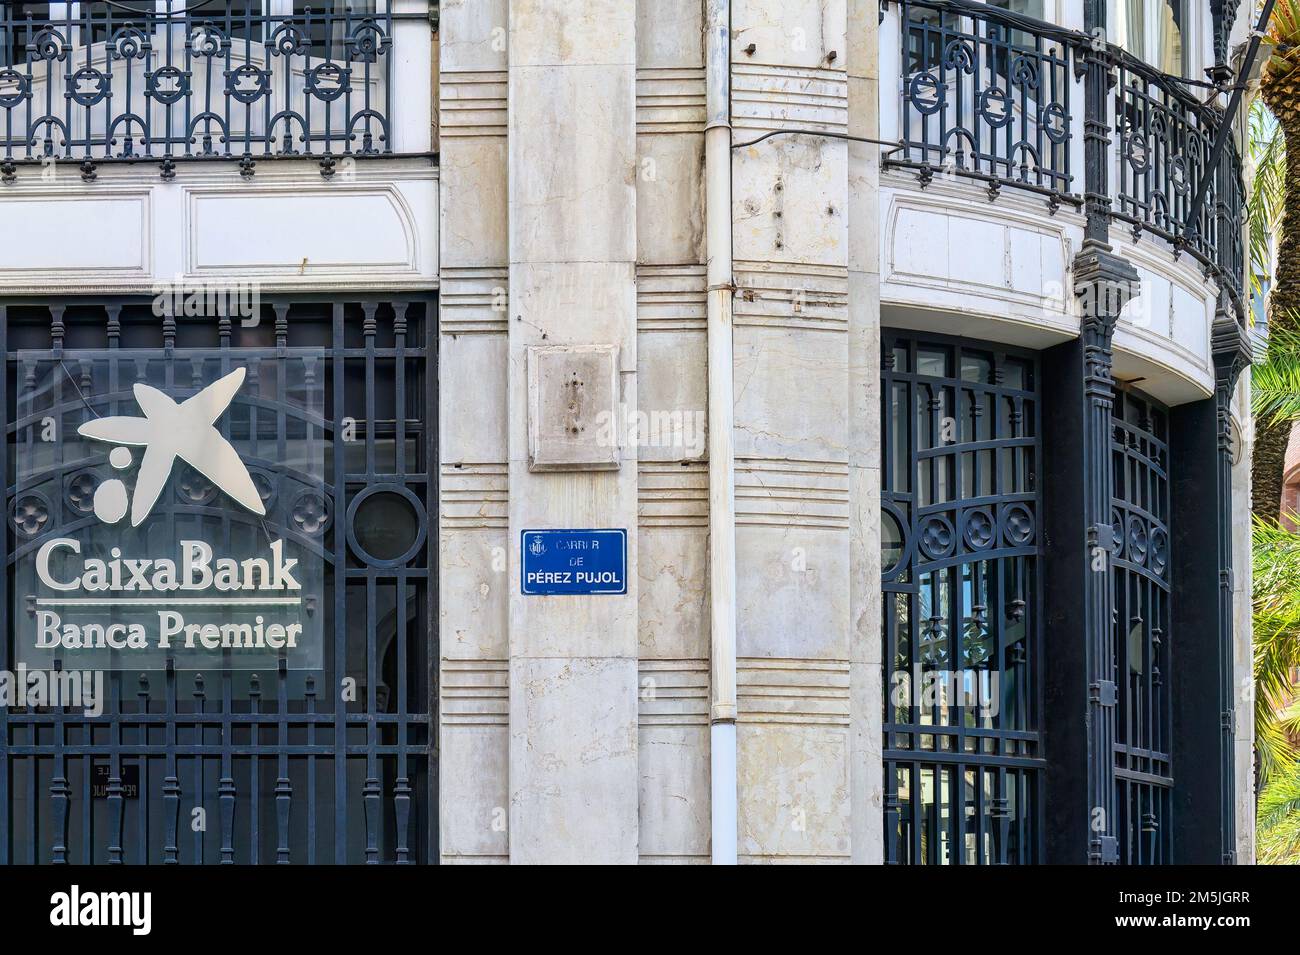 A sign and logo of CaixaBank Banca Premier in the exterior of an old building. Stock Photo